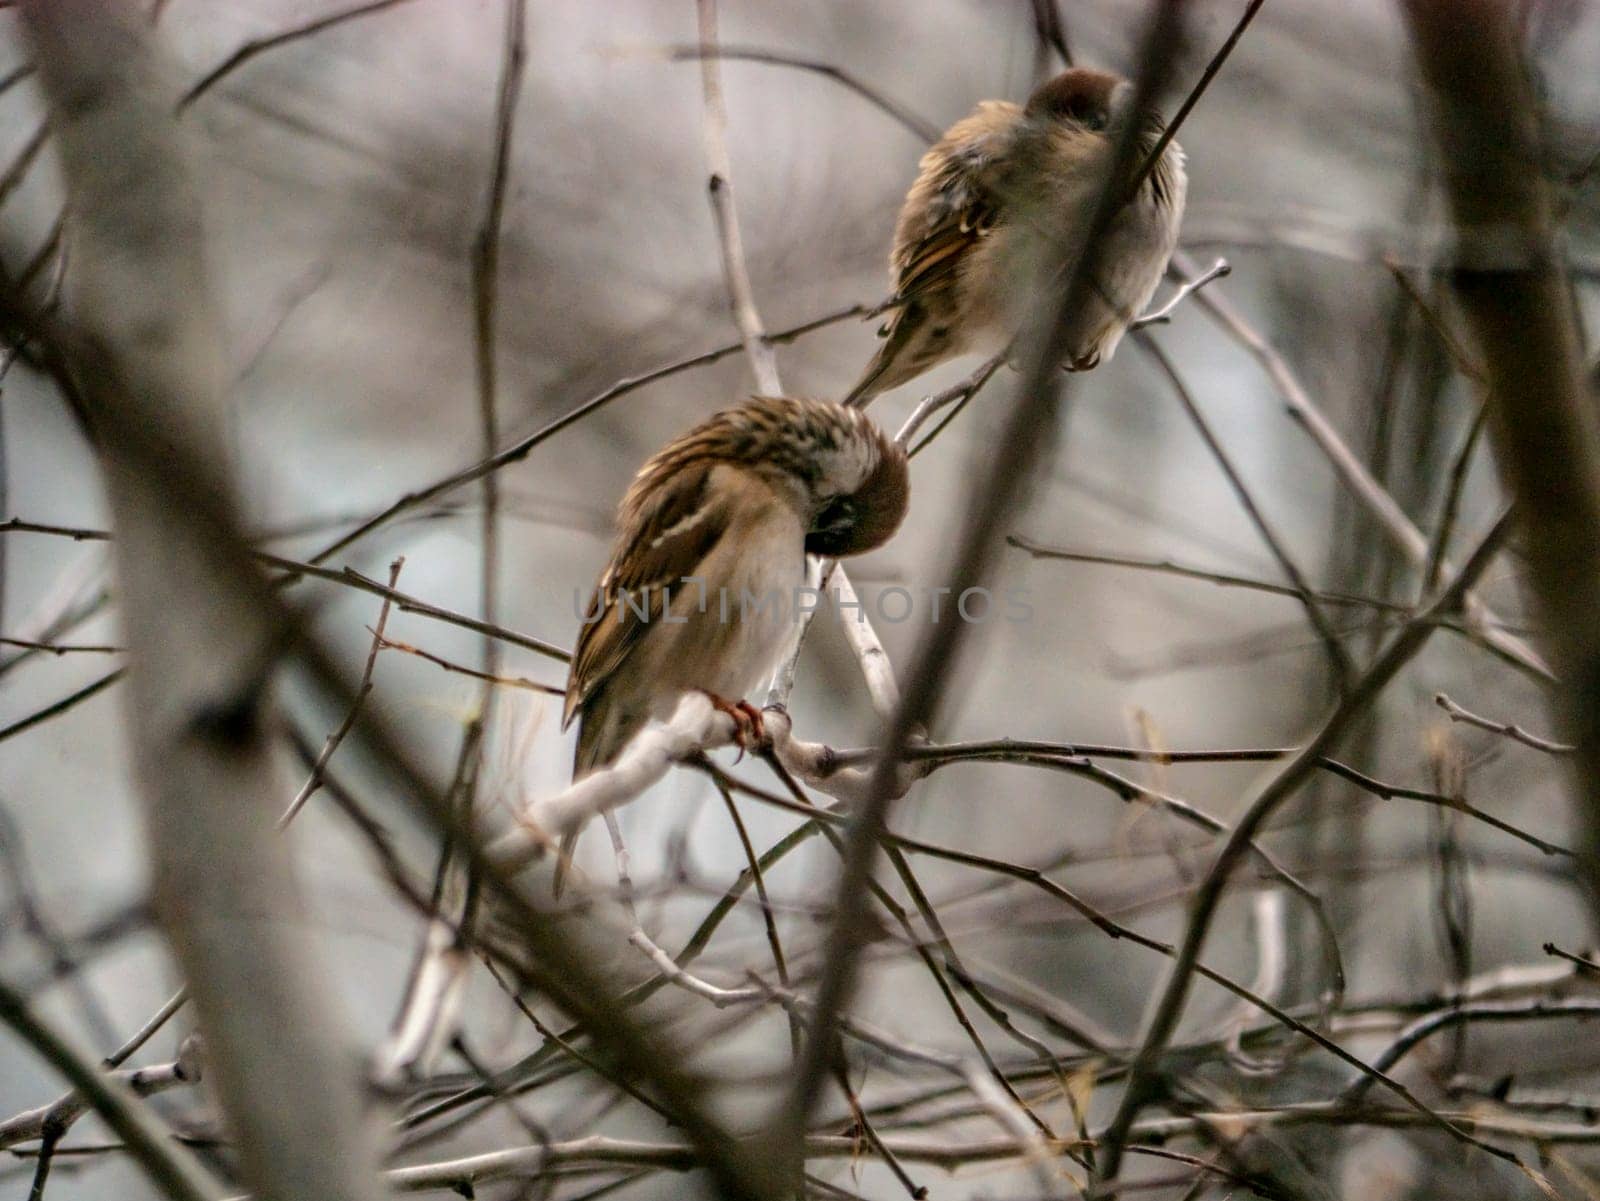 Small sparrow sits on the drying tree branch without leaves during fall season and looking for some food. Fall and first snow with animals. Bird living in city park. Urban birds. soft focus by lempro